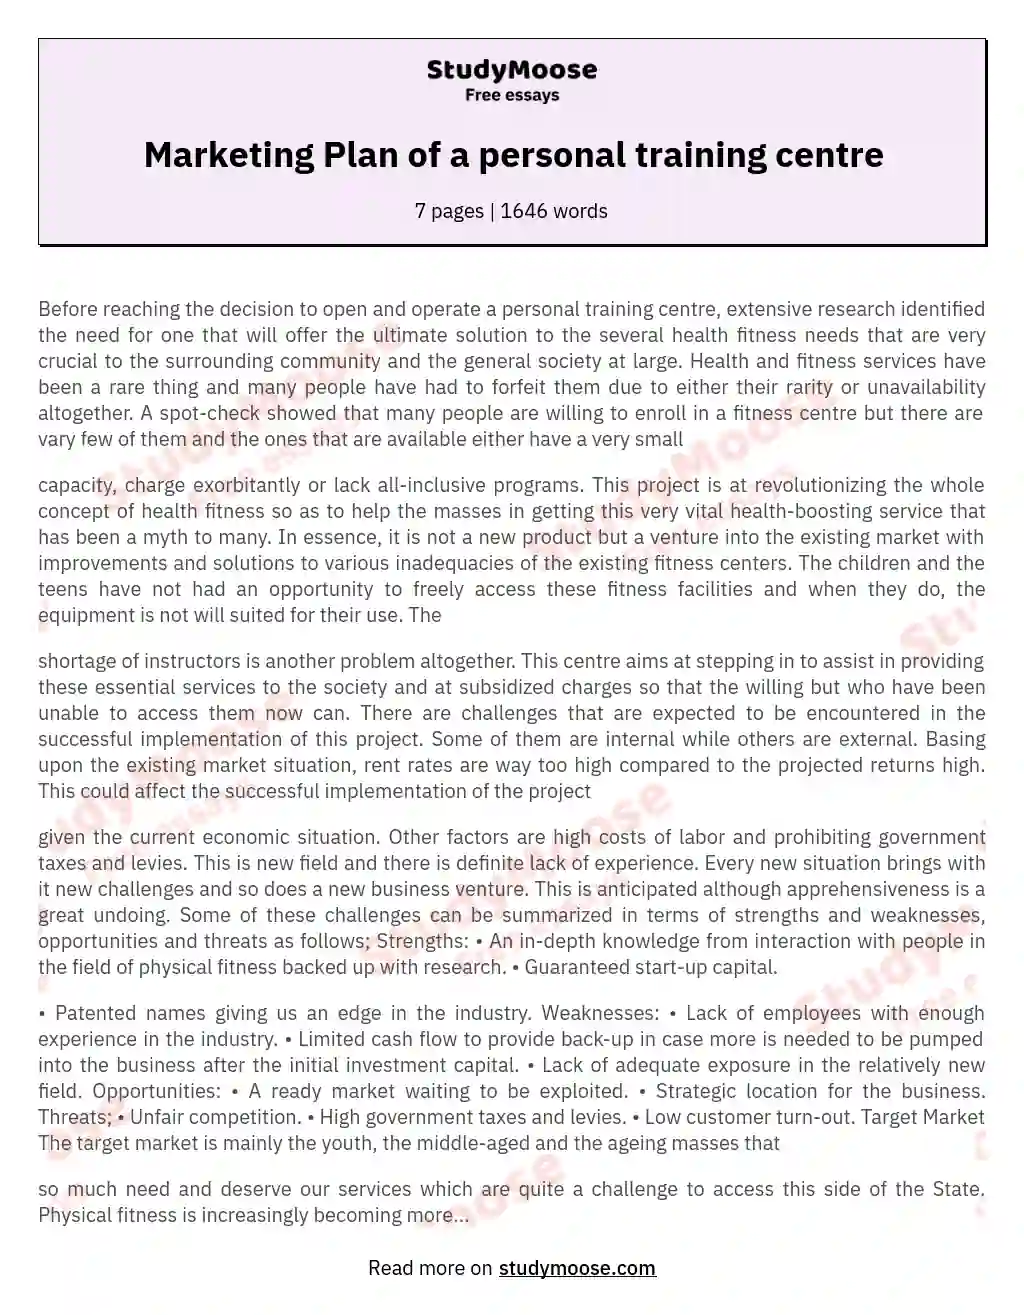 Marketing Plan of a personal training centre essay